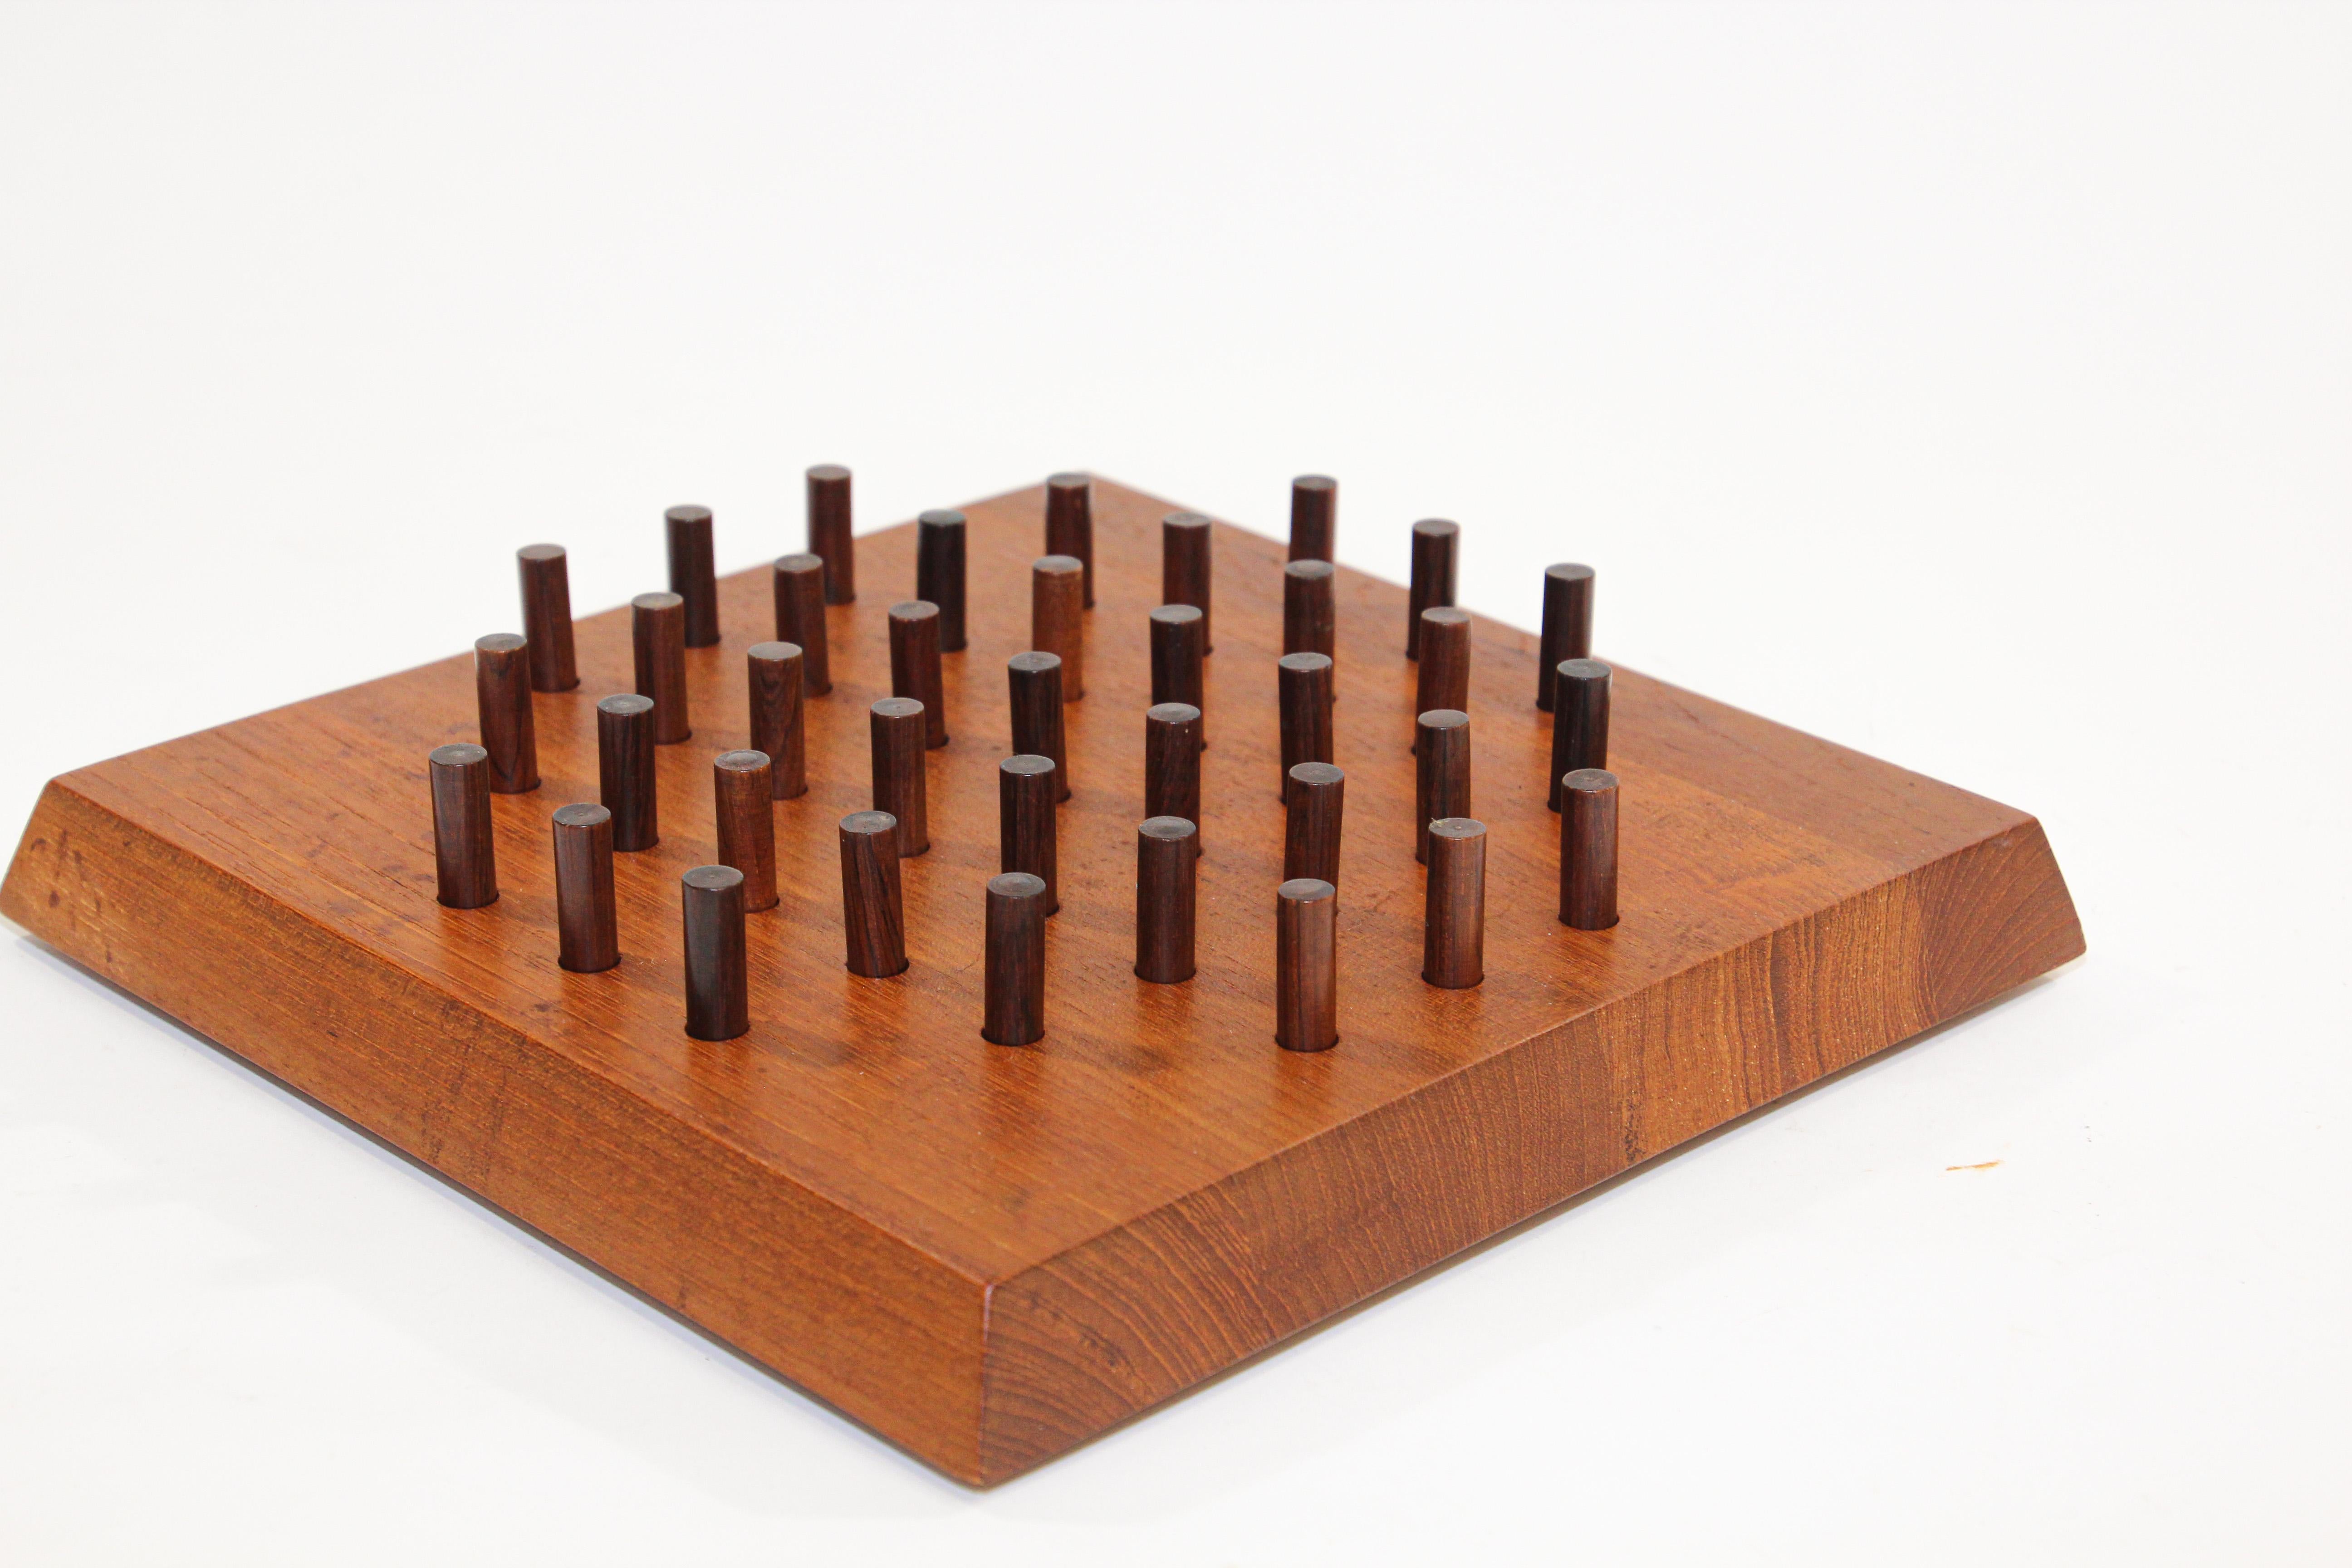 Piet Hein 'Solitaire' rare teak board game for Skjode, Denmark, 1960s.
A solid teak Solitaire game designed by Piet Hein (1905-1996) in the 1950s. Manufactured by Skjode in Skjern, Denmark, during the 1960s
Piet Hein, Skjøde, Denmark.